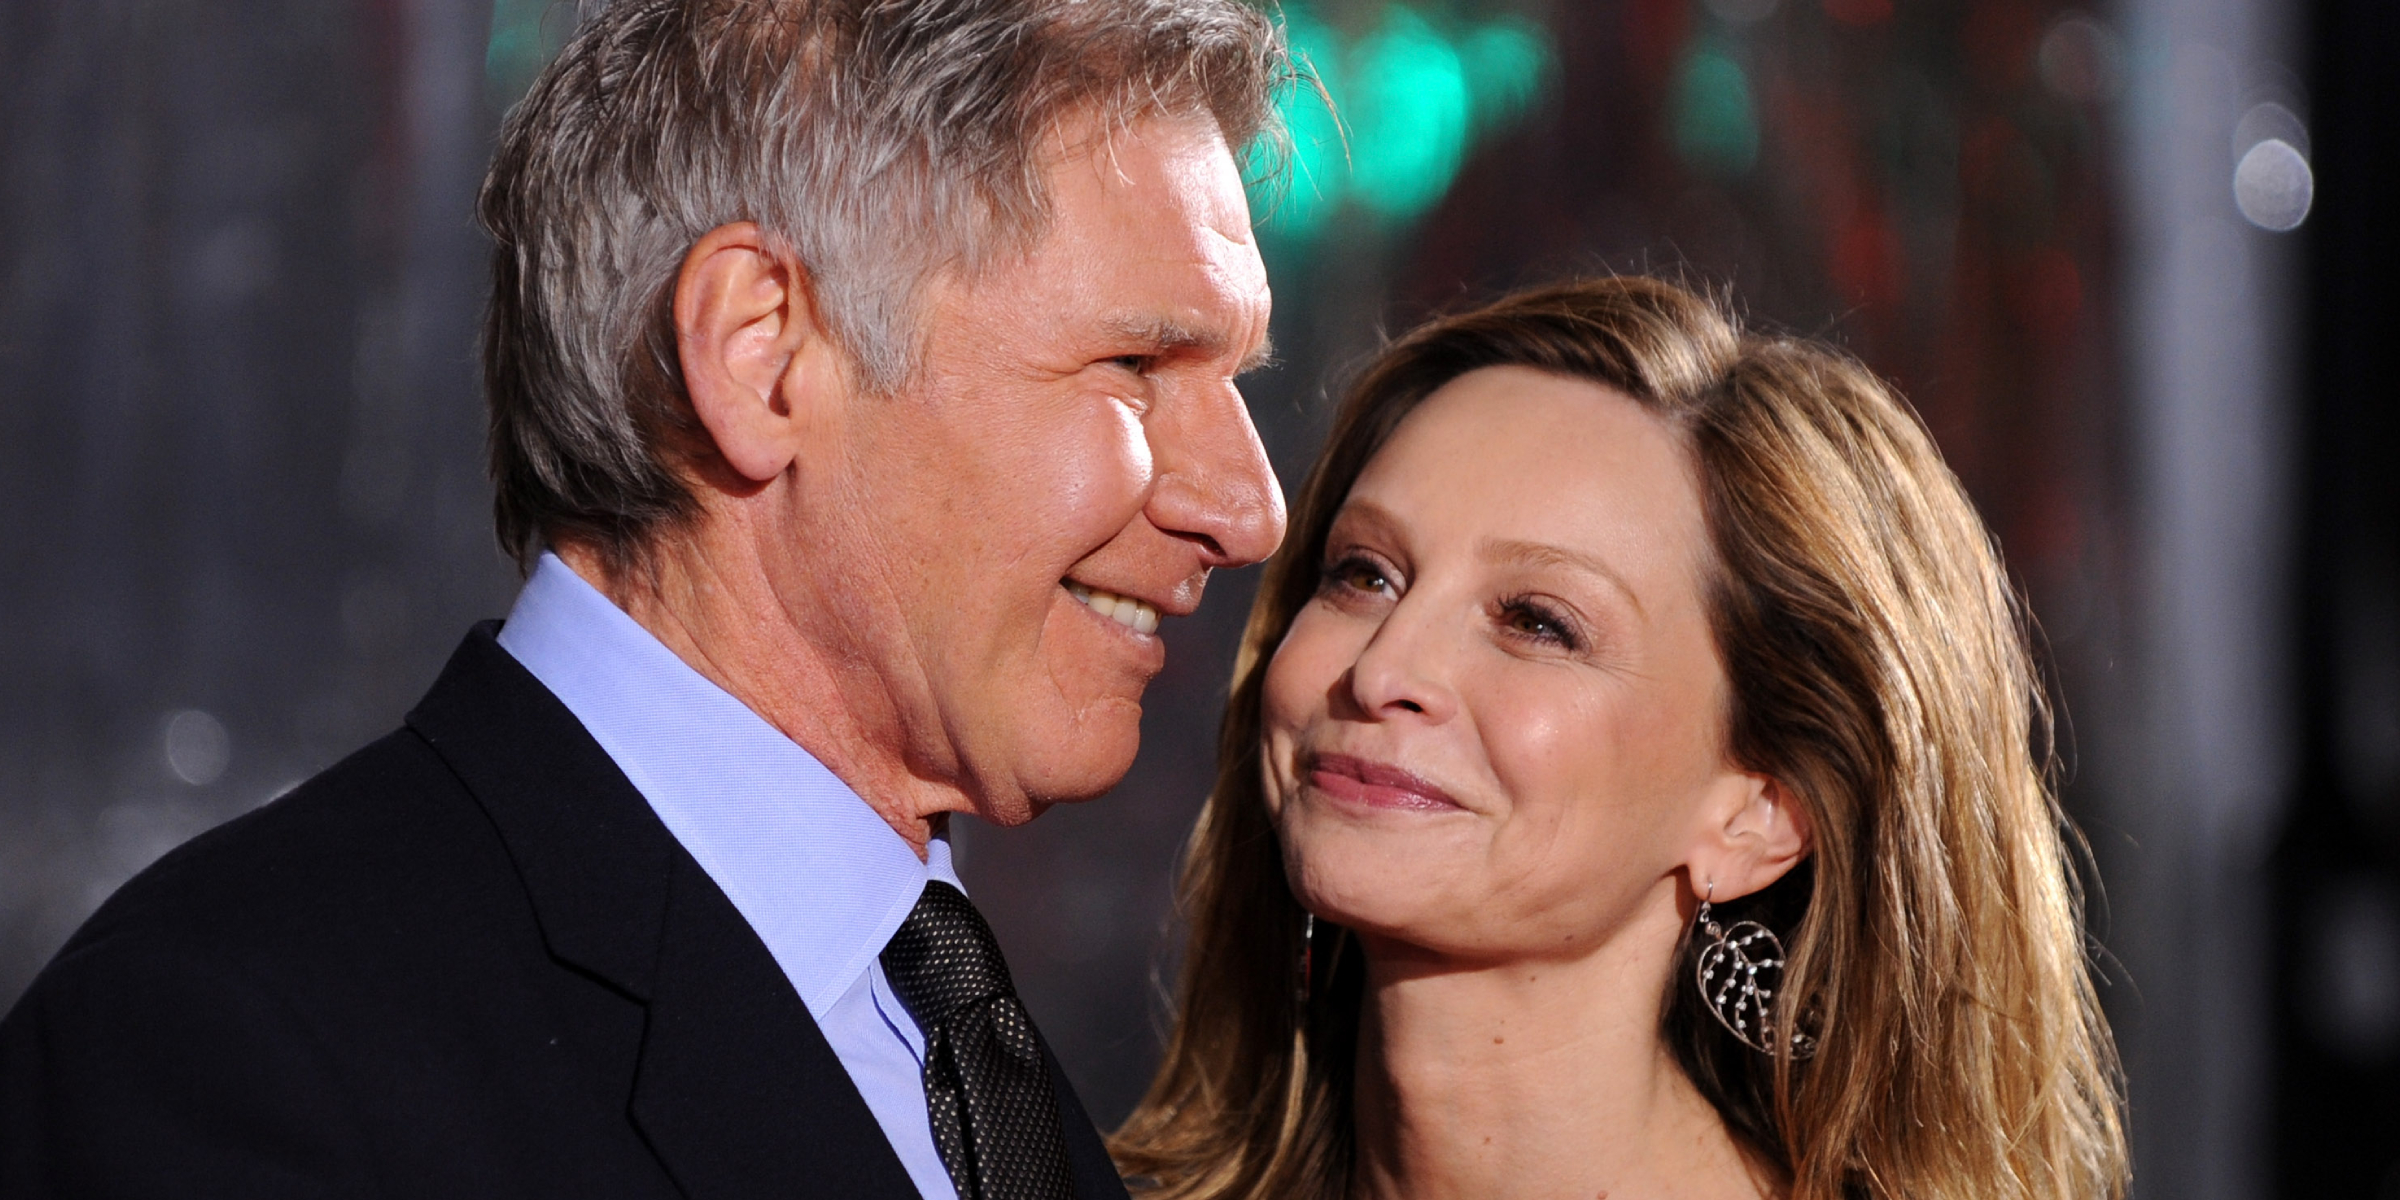 Harrison Ford and Calista Flockhart | Source: Getty Images